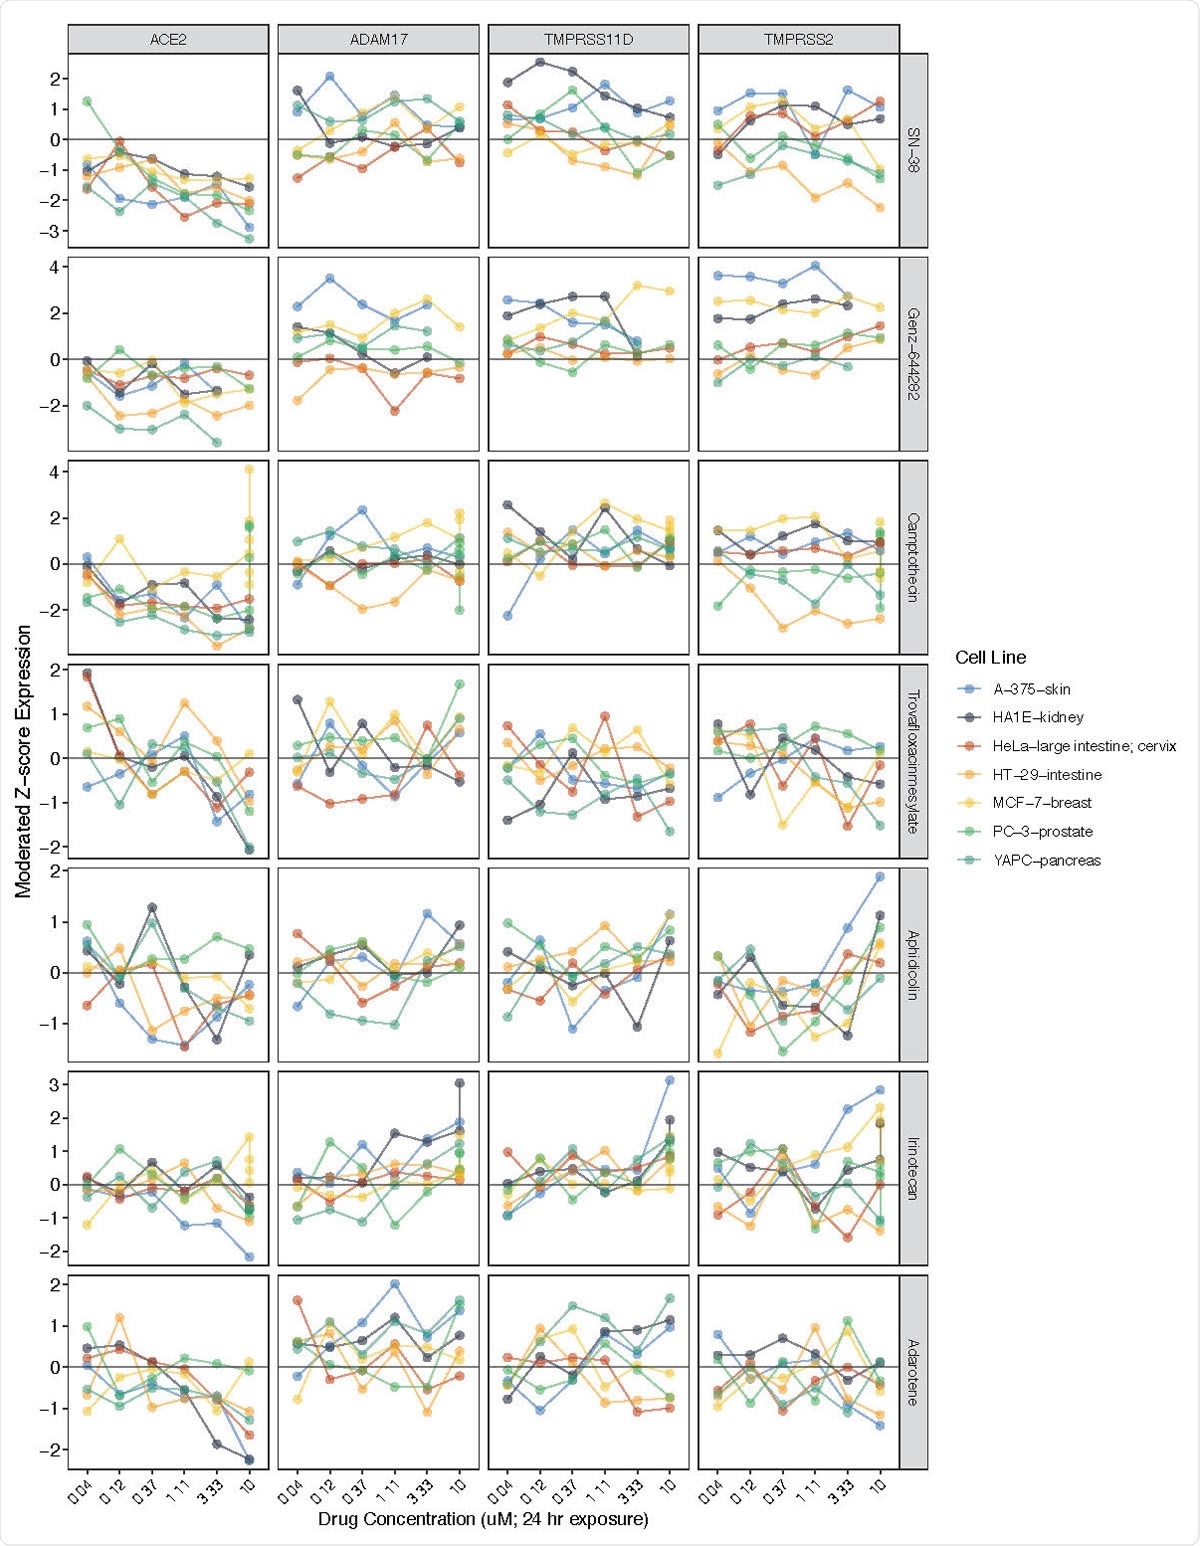 ACE2 expression reductions associated with exposure to various topoisomerase inhibitors. Related genes (ADAM17, TMPRSS11D, TMPRSS2) included for comparison. Y-axis (left) = moderated Z-scores summarizing differential expression across multiple replicates per cell line calculated by the LINCS project. Y-axis (right) = drug name.